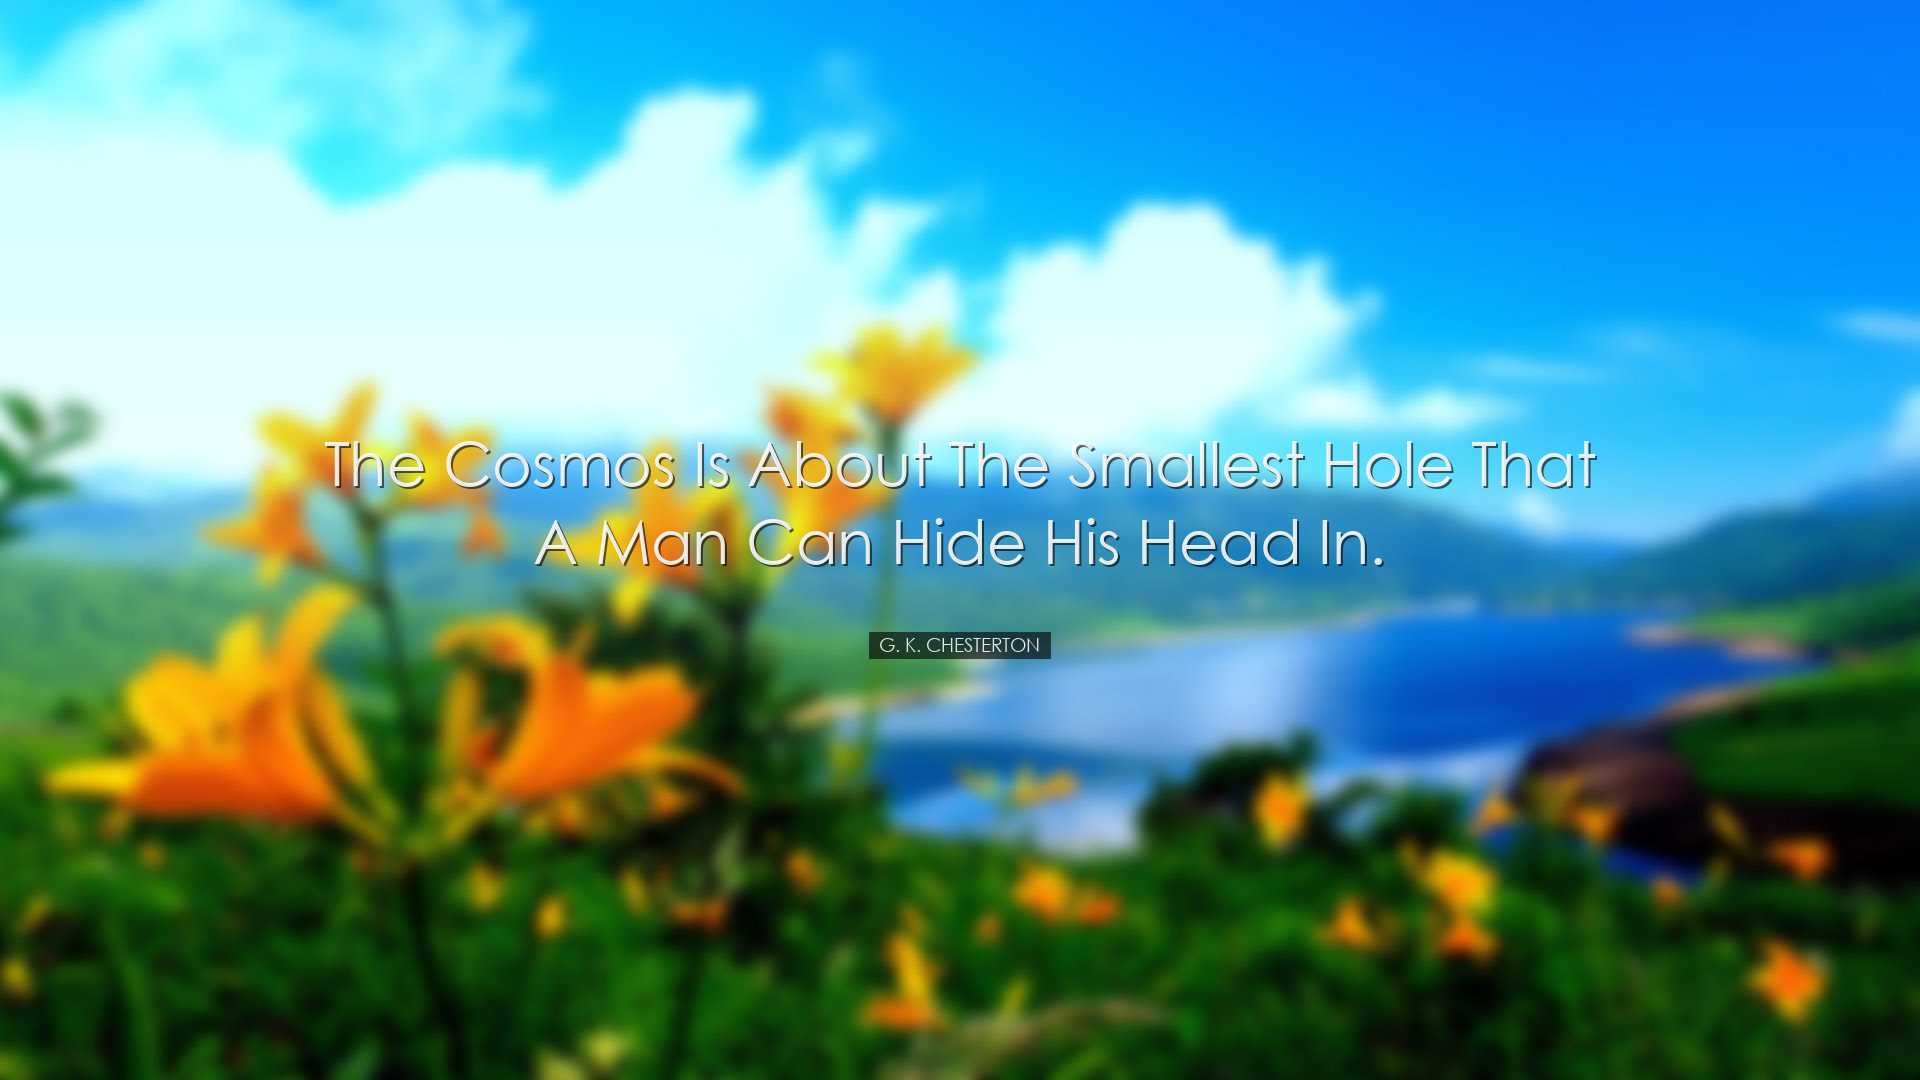 The cosmos is about the smallest hole that a man can hide his head